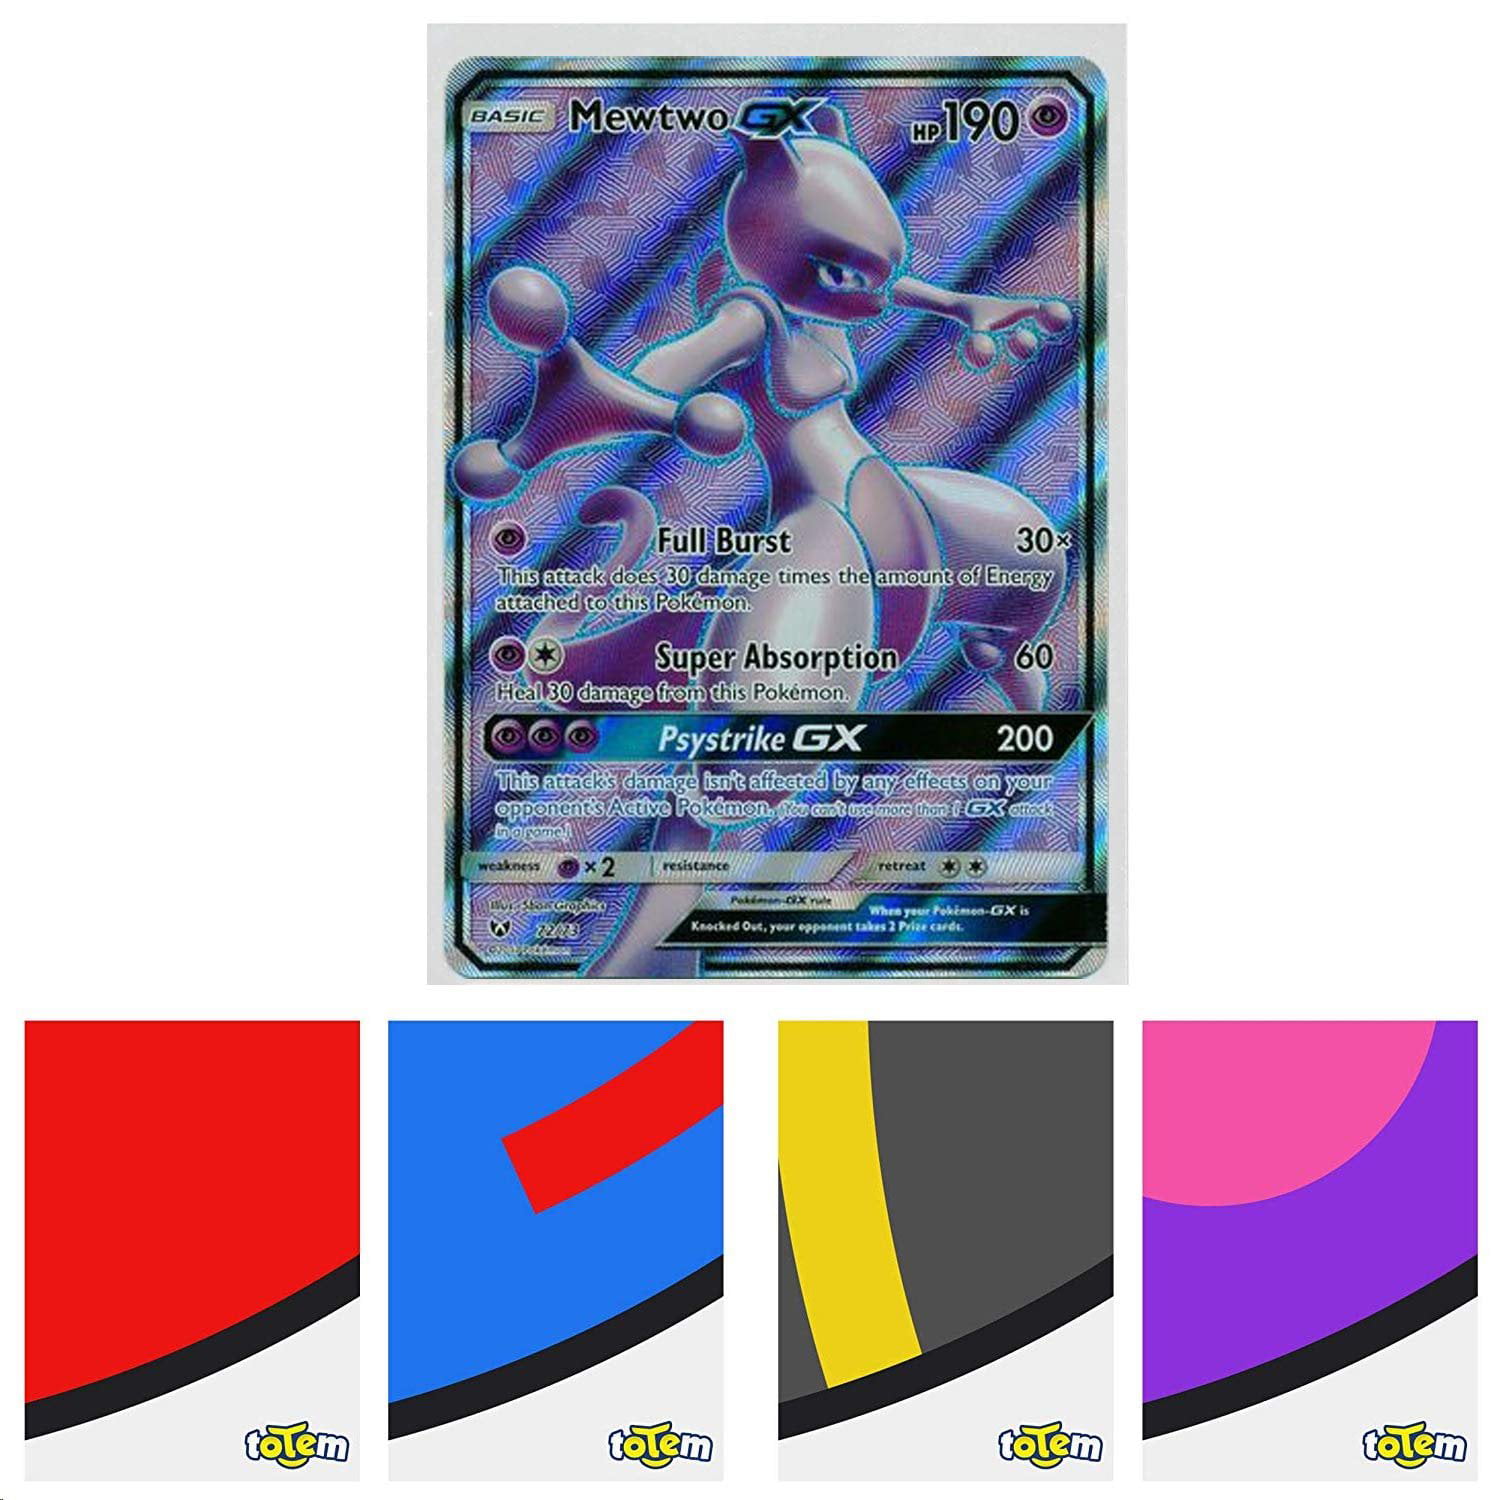 Mewtwo Gx 72 73 Full Art Ultra Rare Foil Holo With Totem World Card Protector Sleeve Compatible With Pokemon Cards Sun Moon Shining Legends Walmart Com Walmart Com